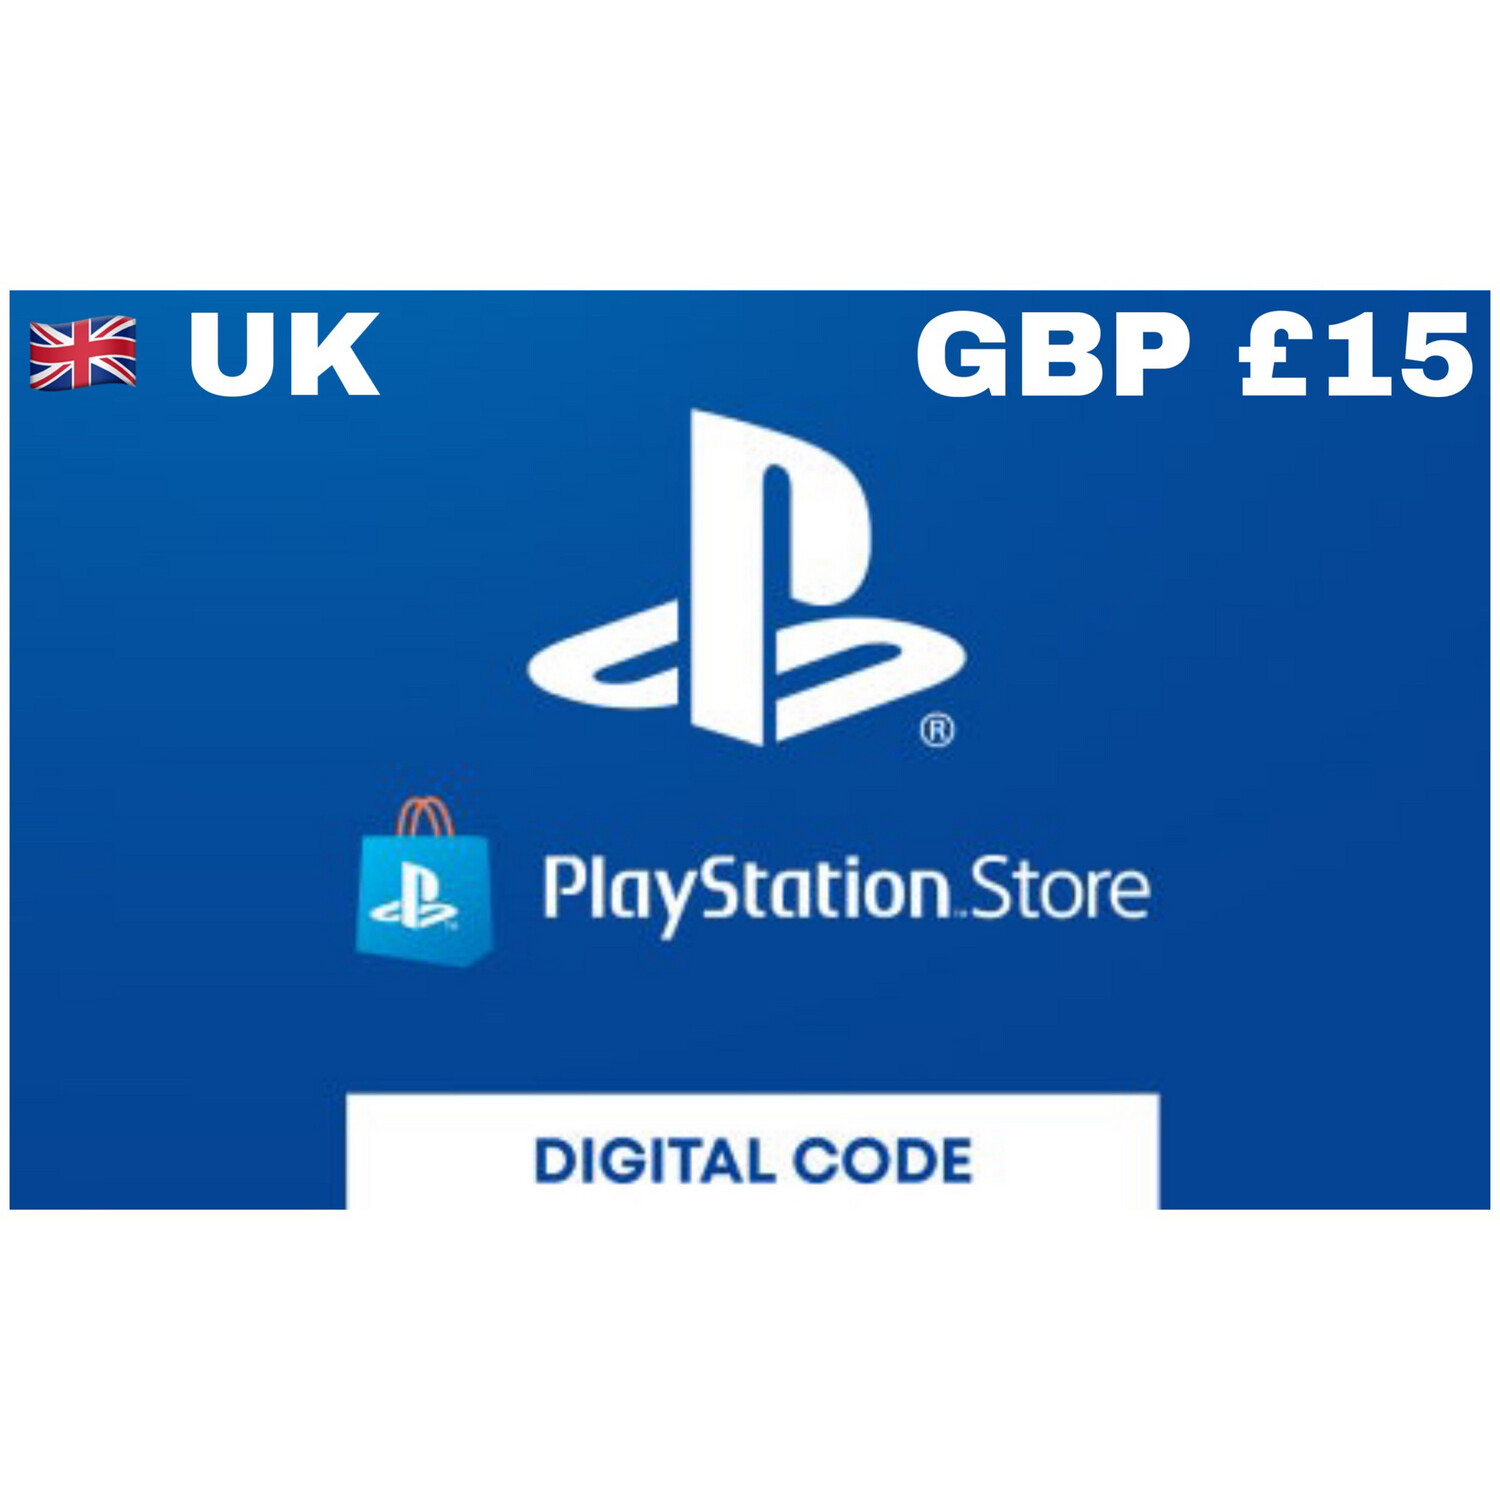 Playstation Store Gift Card UK GBP £15